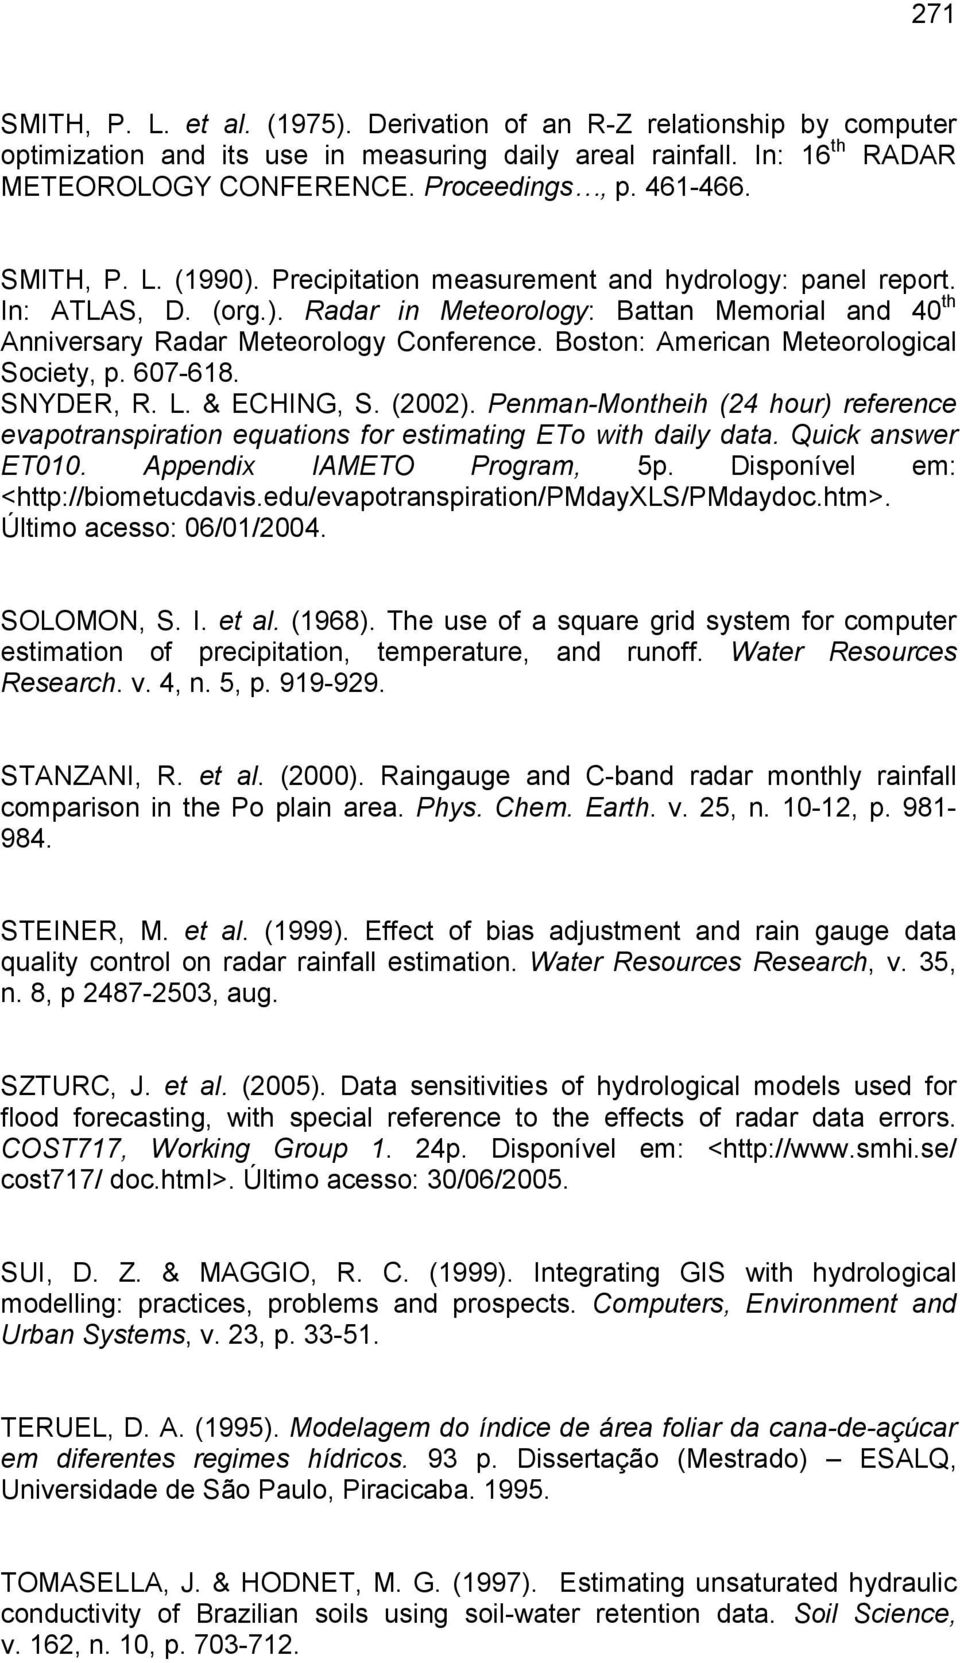 Boston: American Meteorological Society, p. 607-618. SNYDER, R. L. & ECHING, S. (2002). Penman-Montheih (24 hour) reference evapotranspiration equations for estimating ETo with daily data.